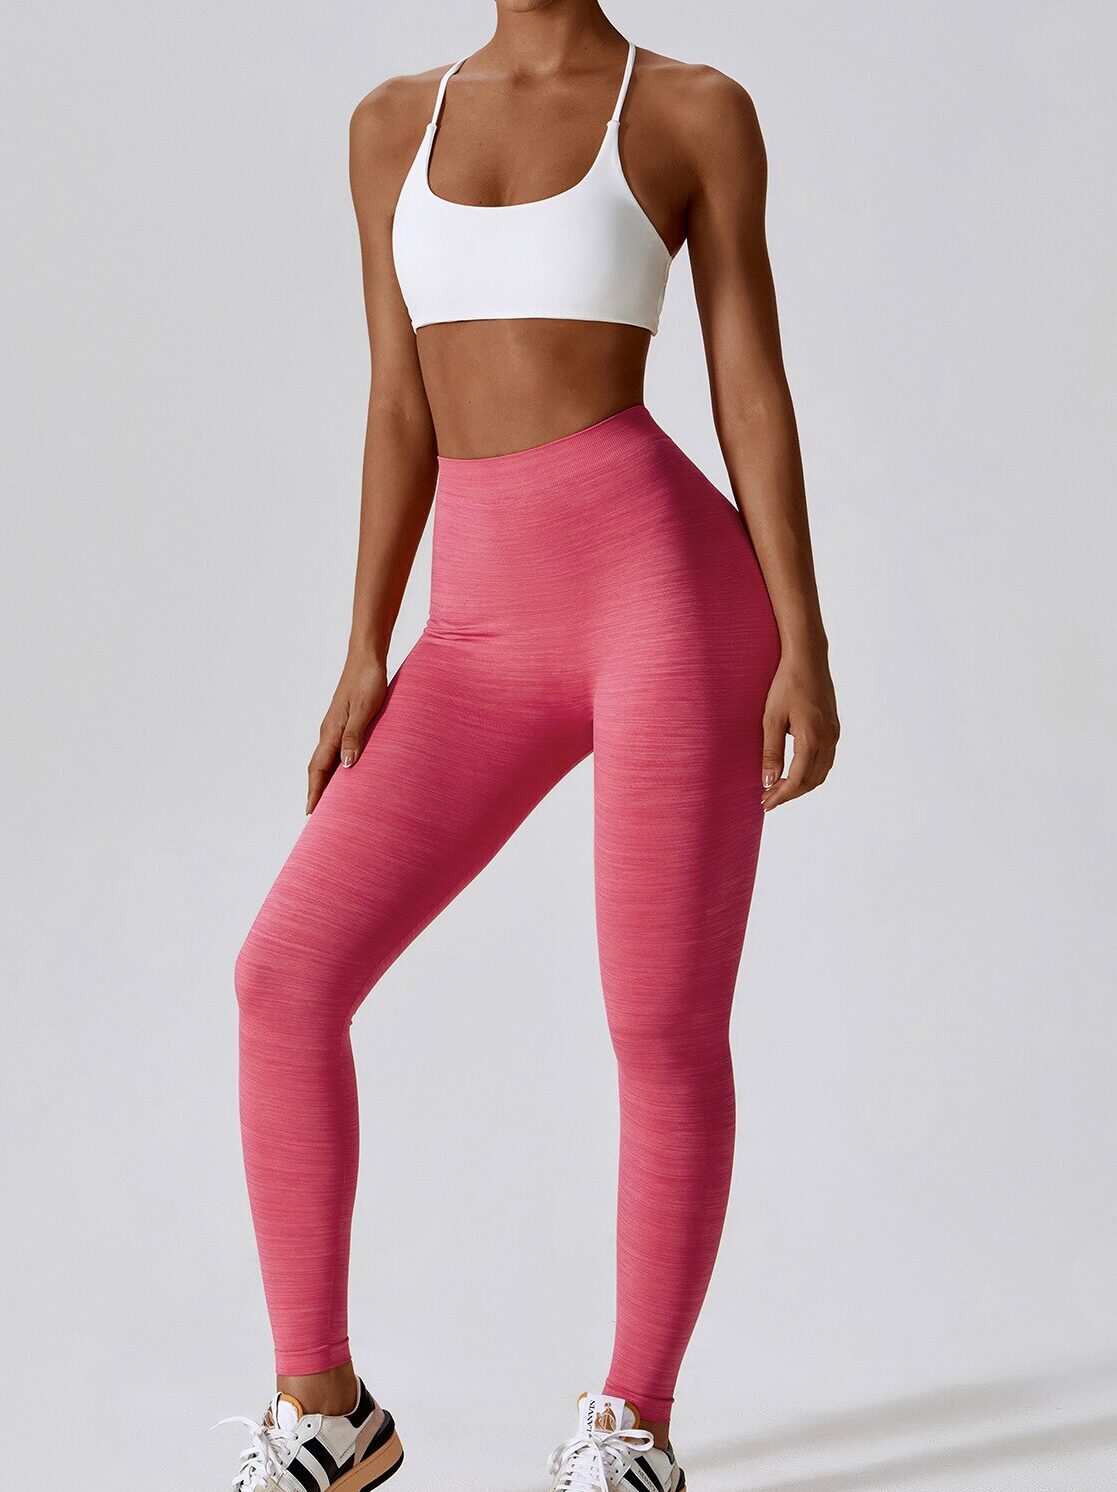 Womens V Shaped Scrunch Yoga Pants With Scrunch Compression For Slimming  Waist And Exercise, Ideal For Yoga, Running, Bike Sports And Sexy Seamless  Leggings. From Noellolitary, $12.99